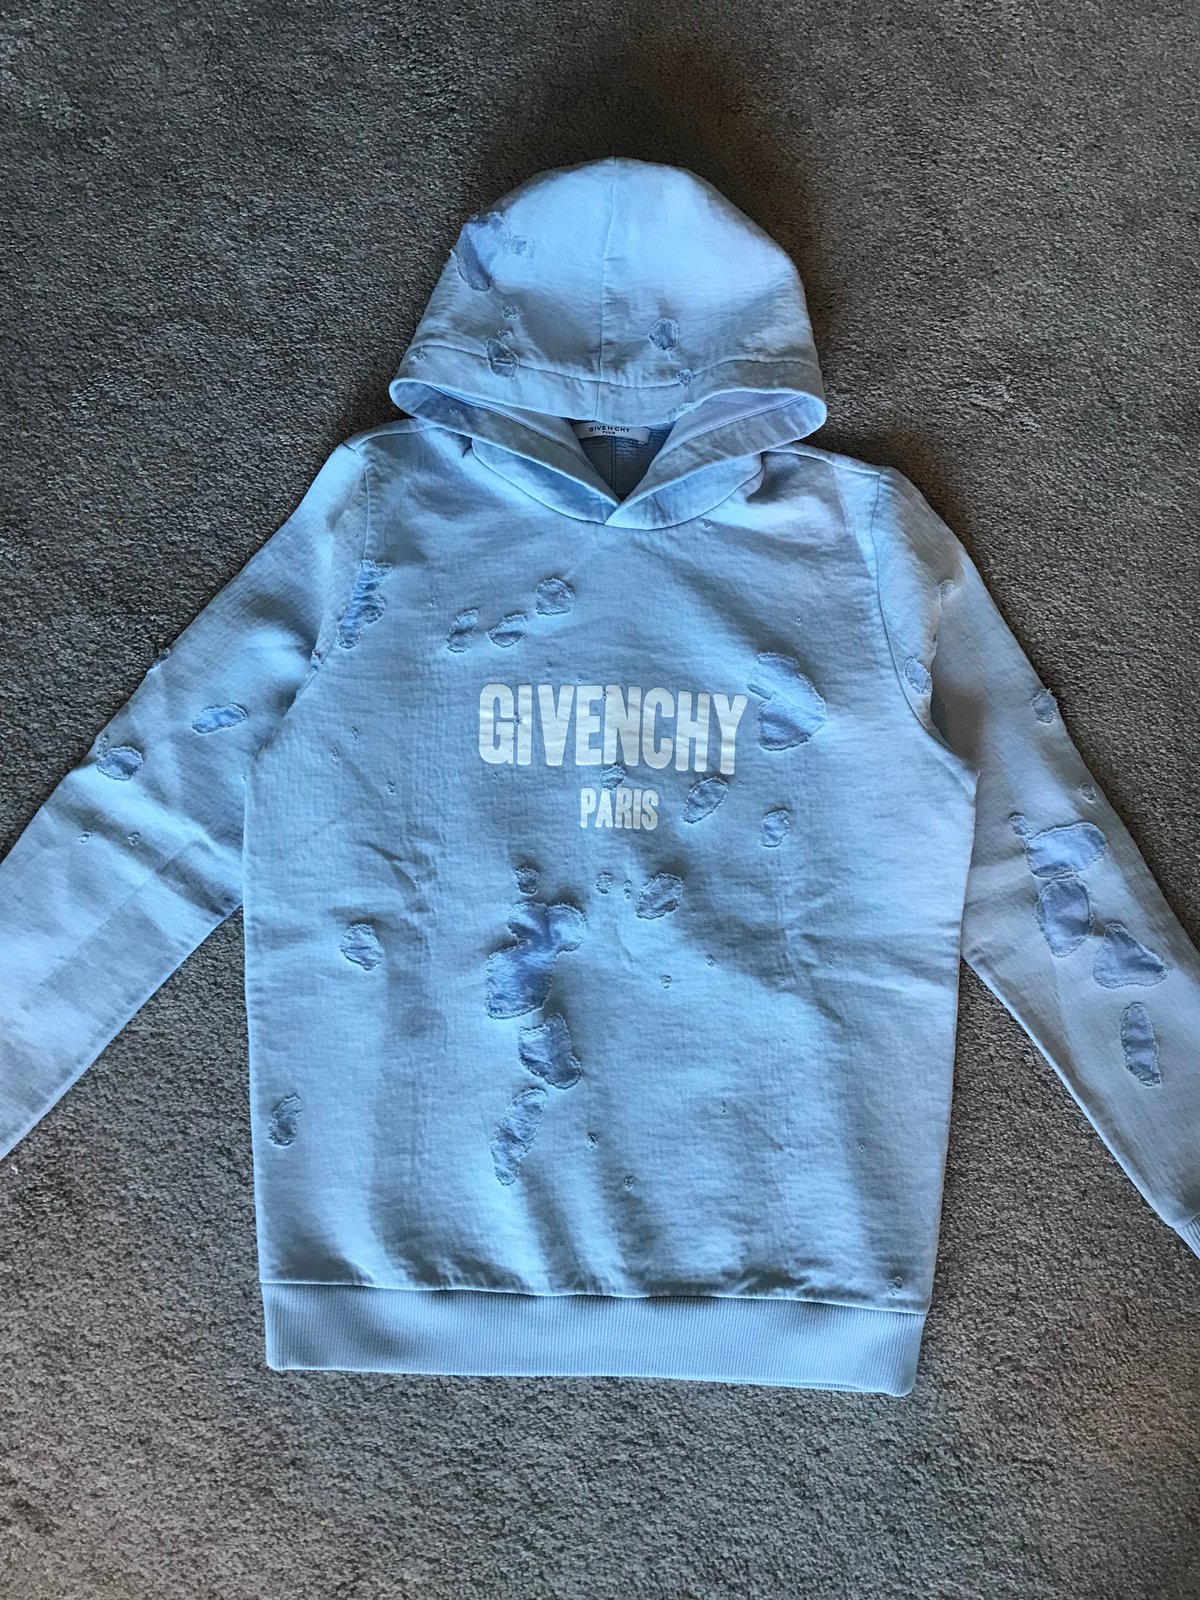 givenchy hoodie light blue